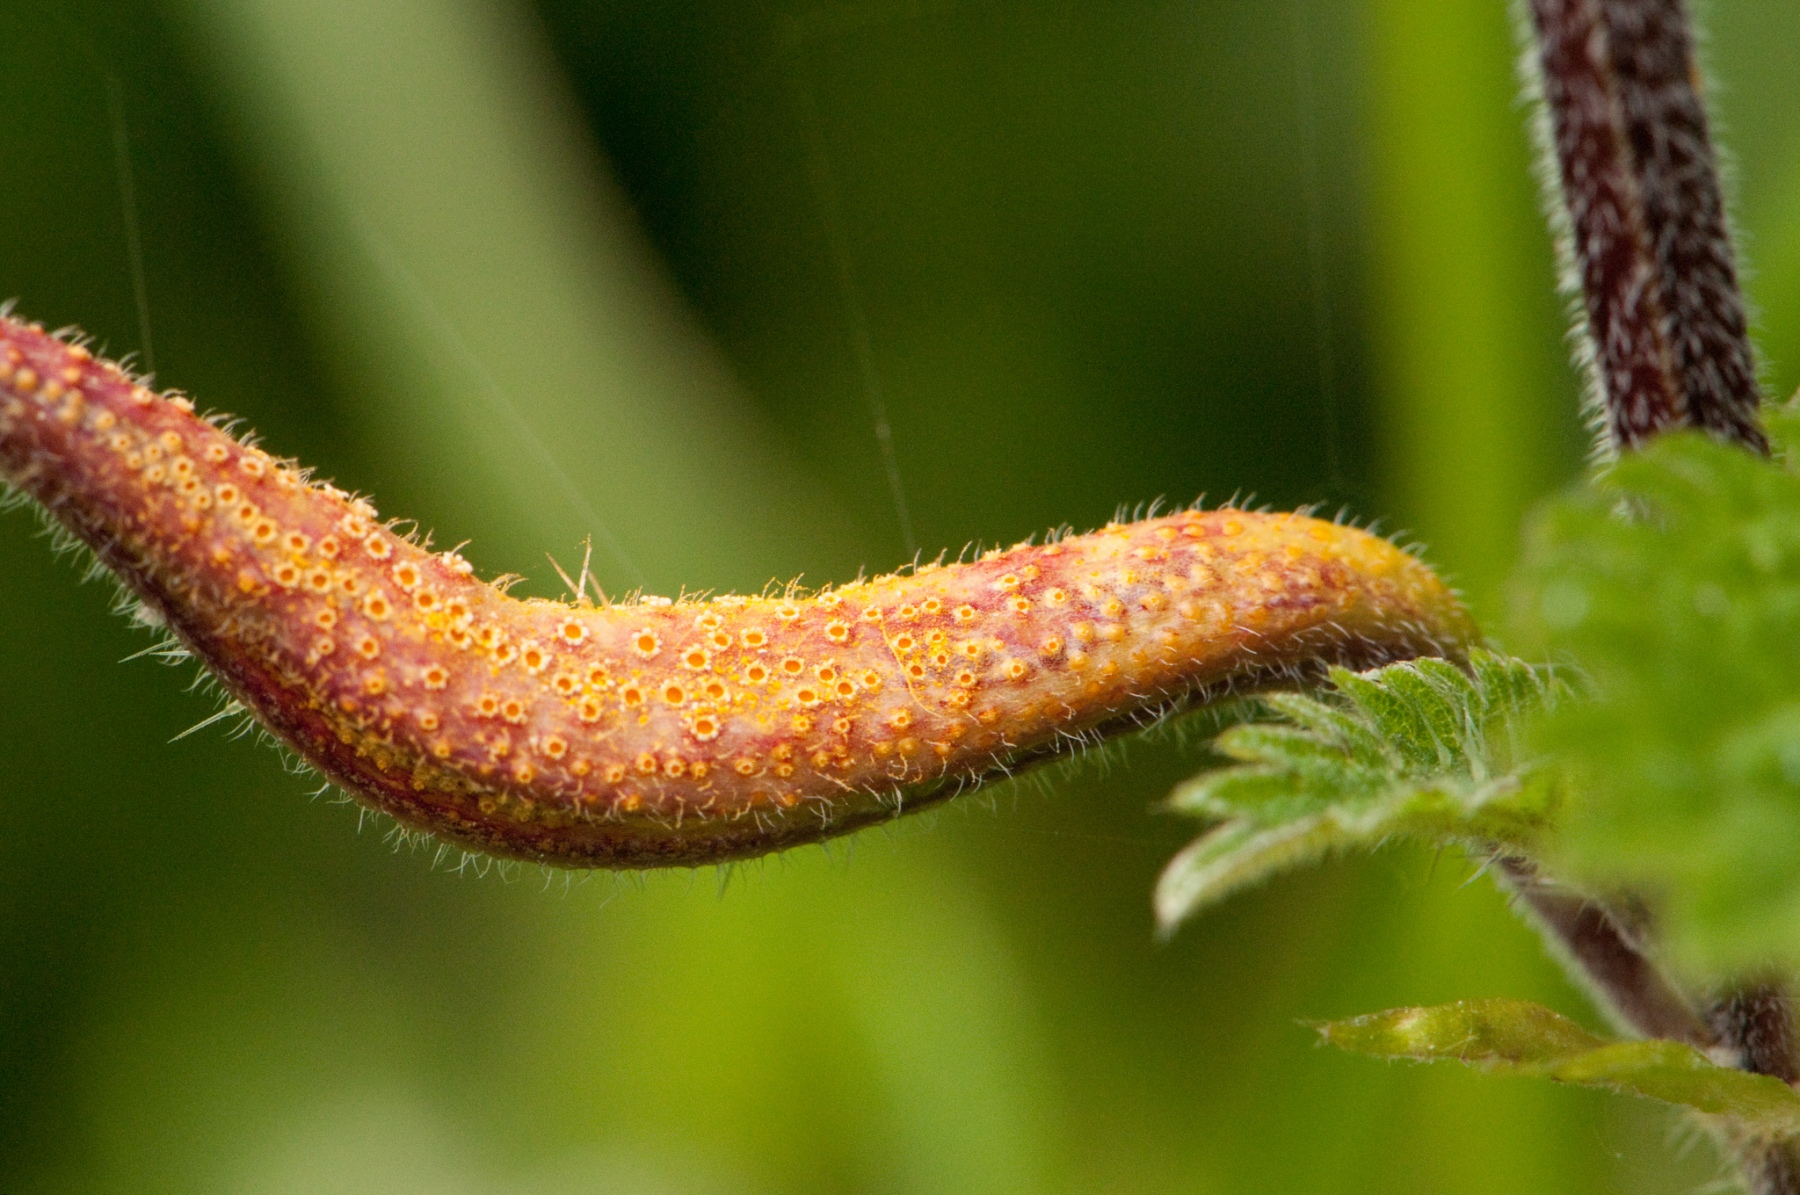 Nettle Rust - Puccinia urticata, North Anston Pit Tip.